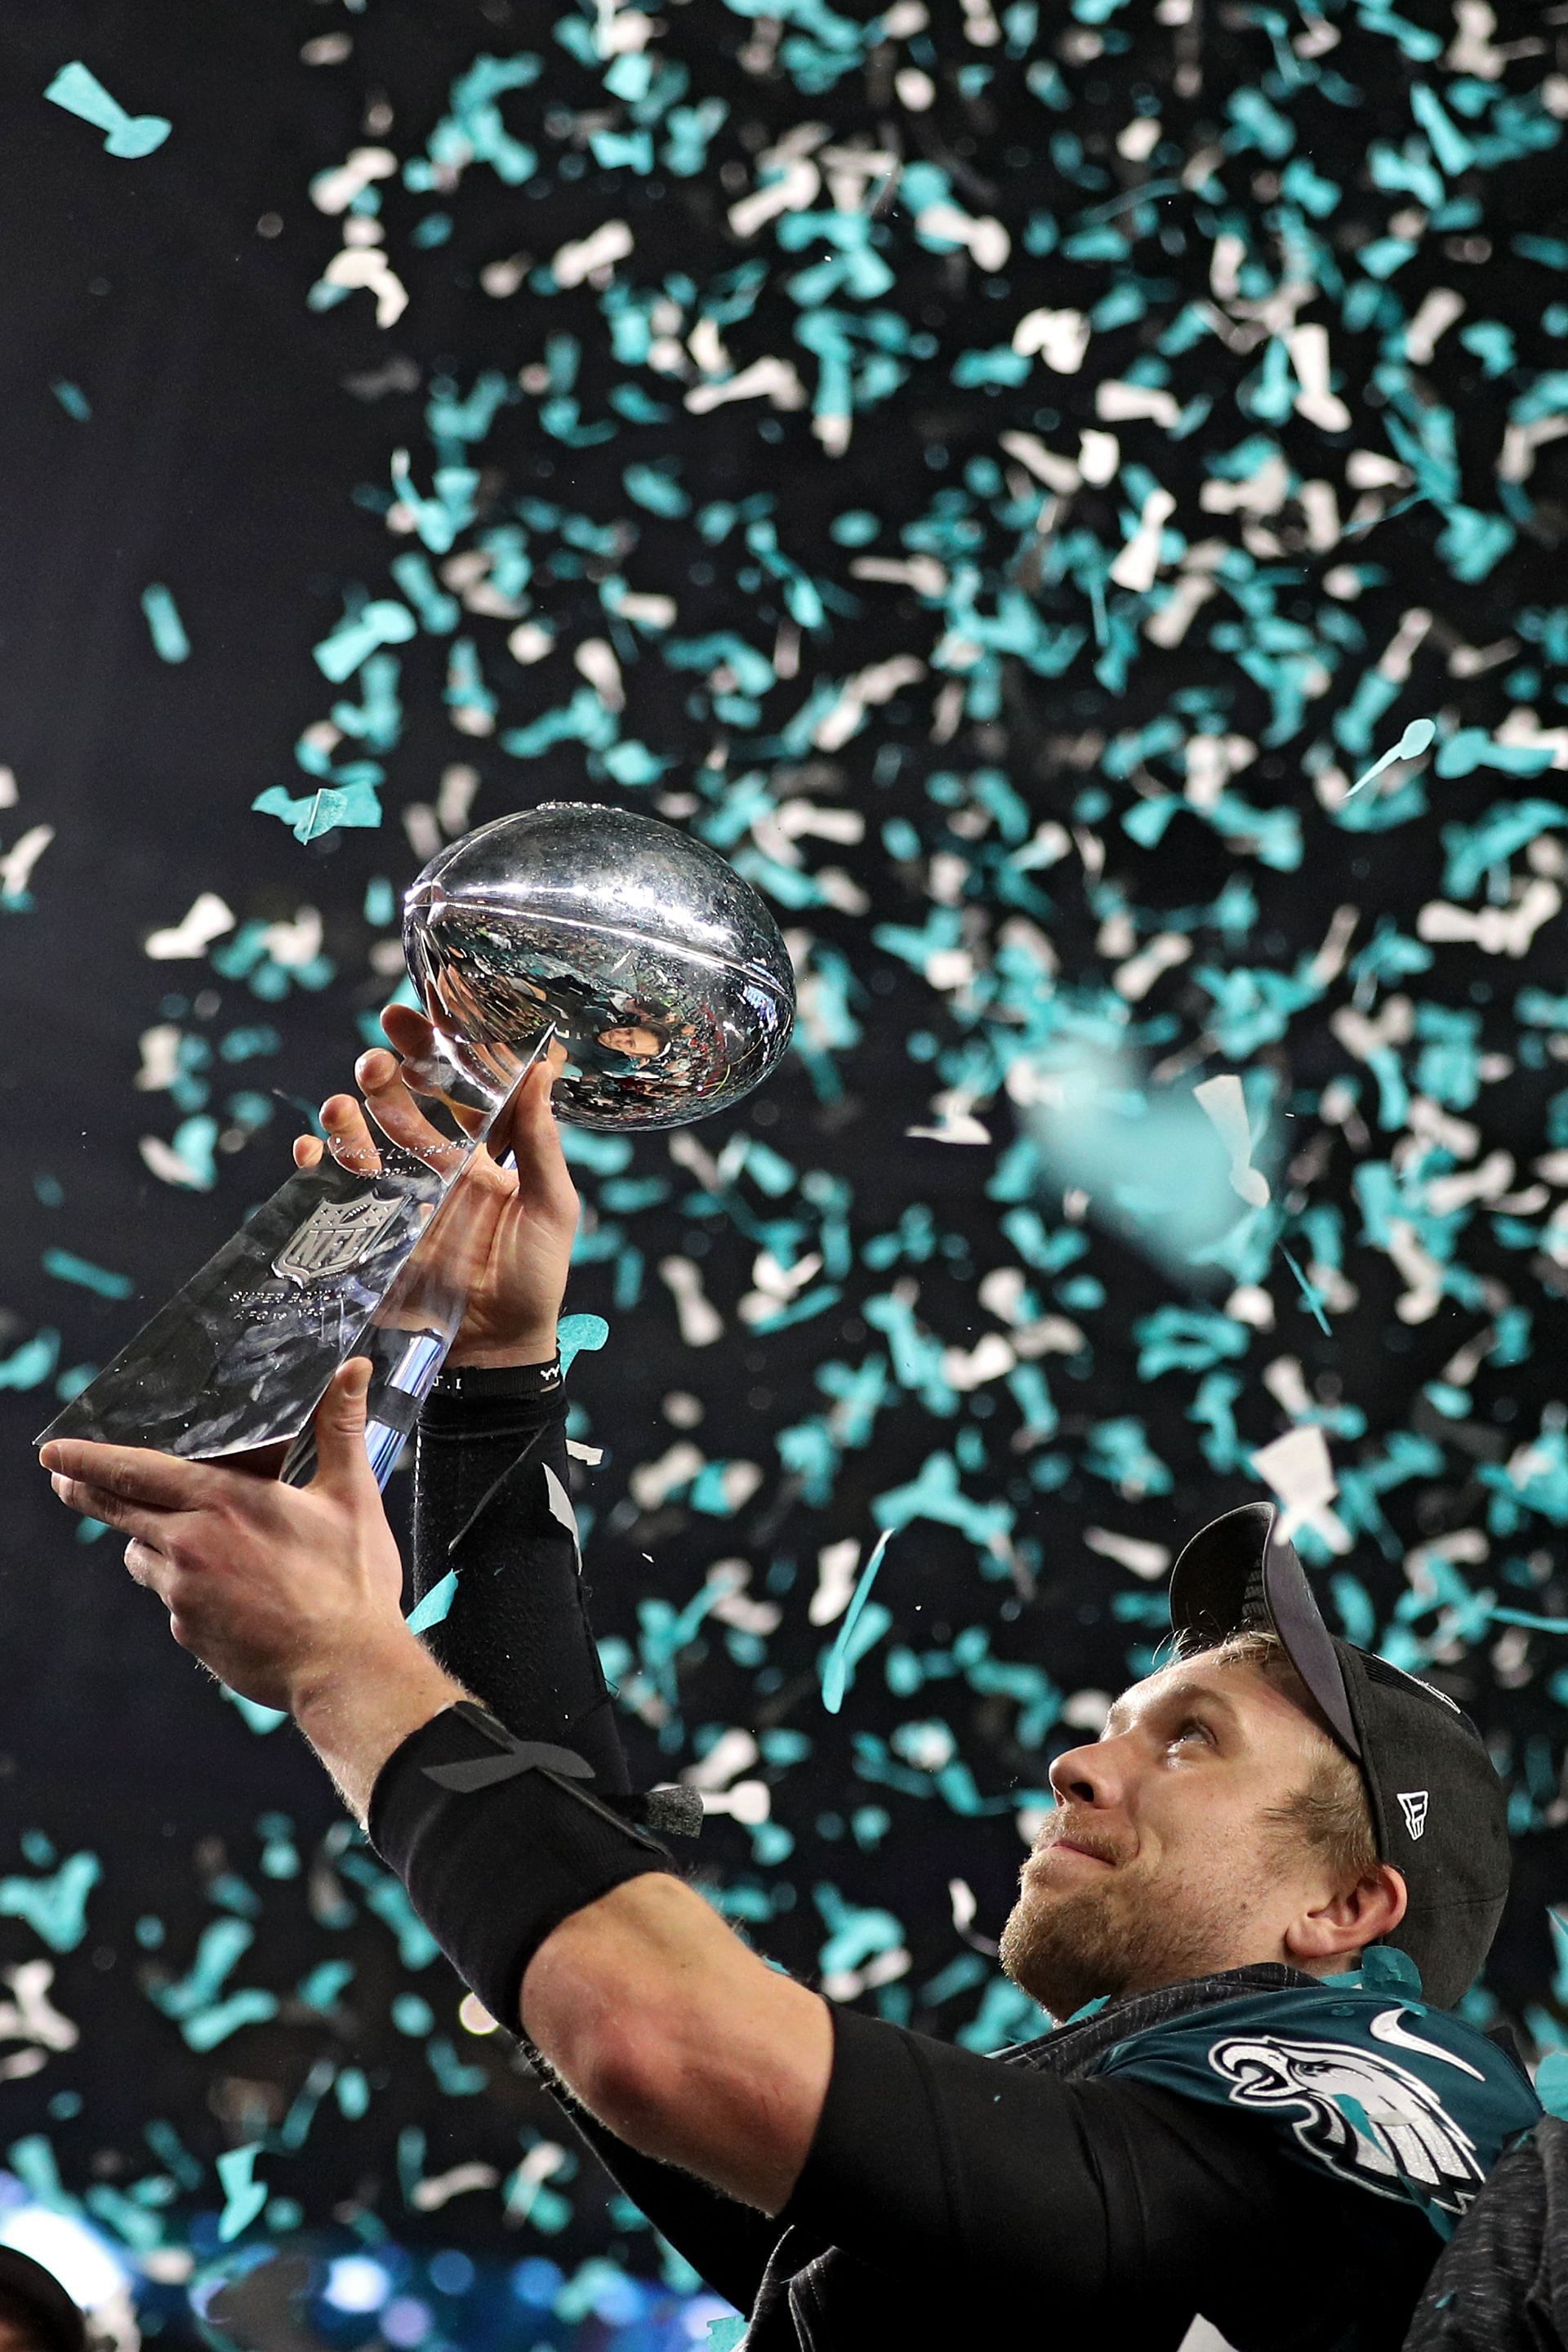 The QB with the Eagles hoisting the Lombardi Trophy after winning Super Bowl LII over the Patriots